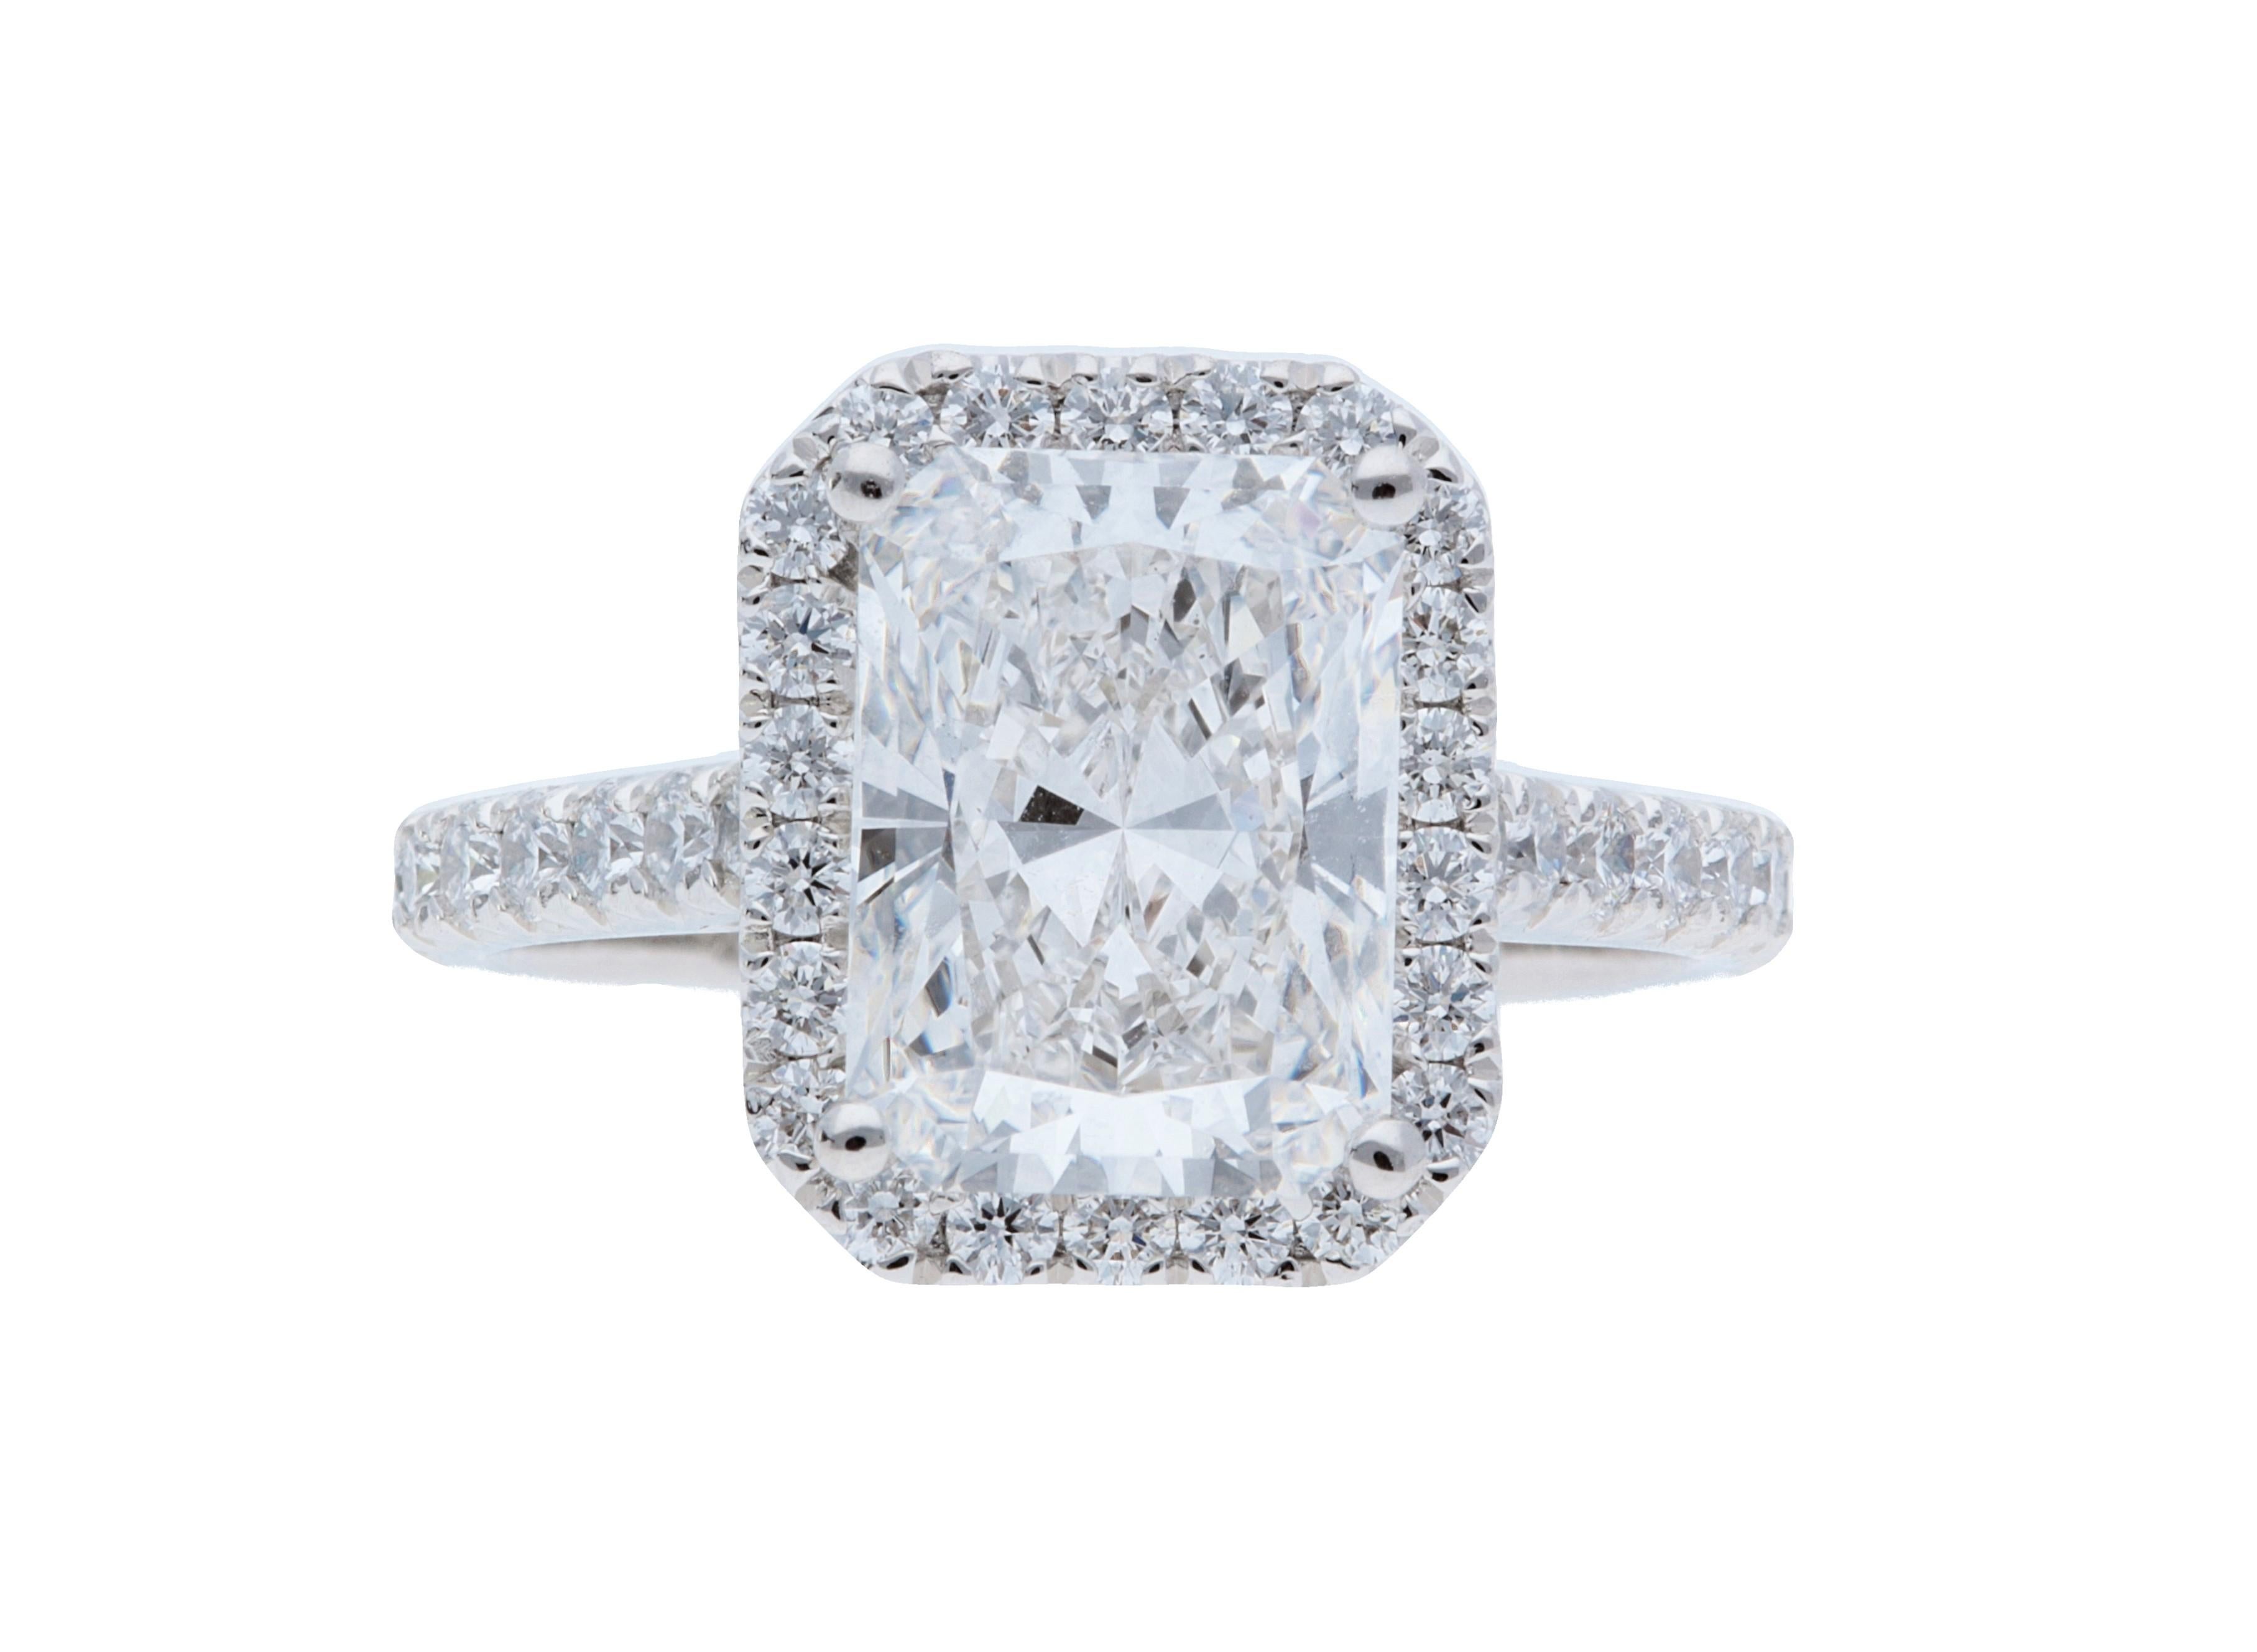 A Sofer Jewelry original. GIA certified 3.30 carat F VS1 radiant diamond set in platinum halo ring with 0.71 carats of weight diamonds. Size 6.5.